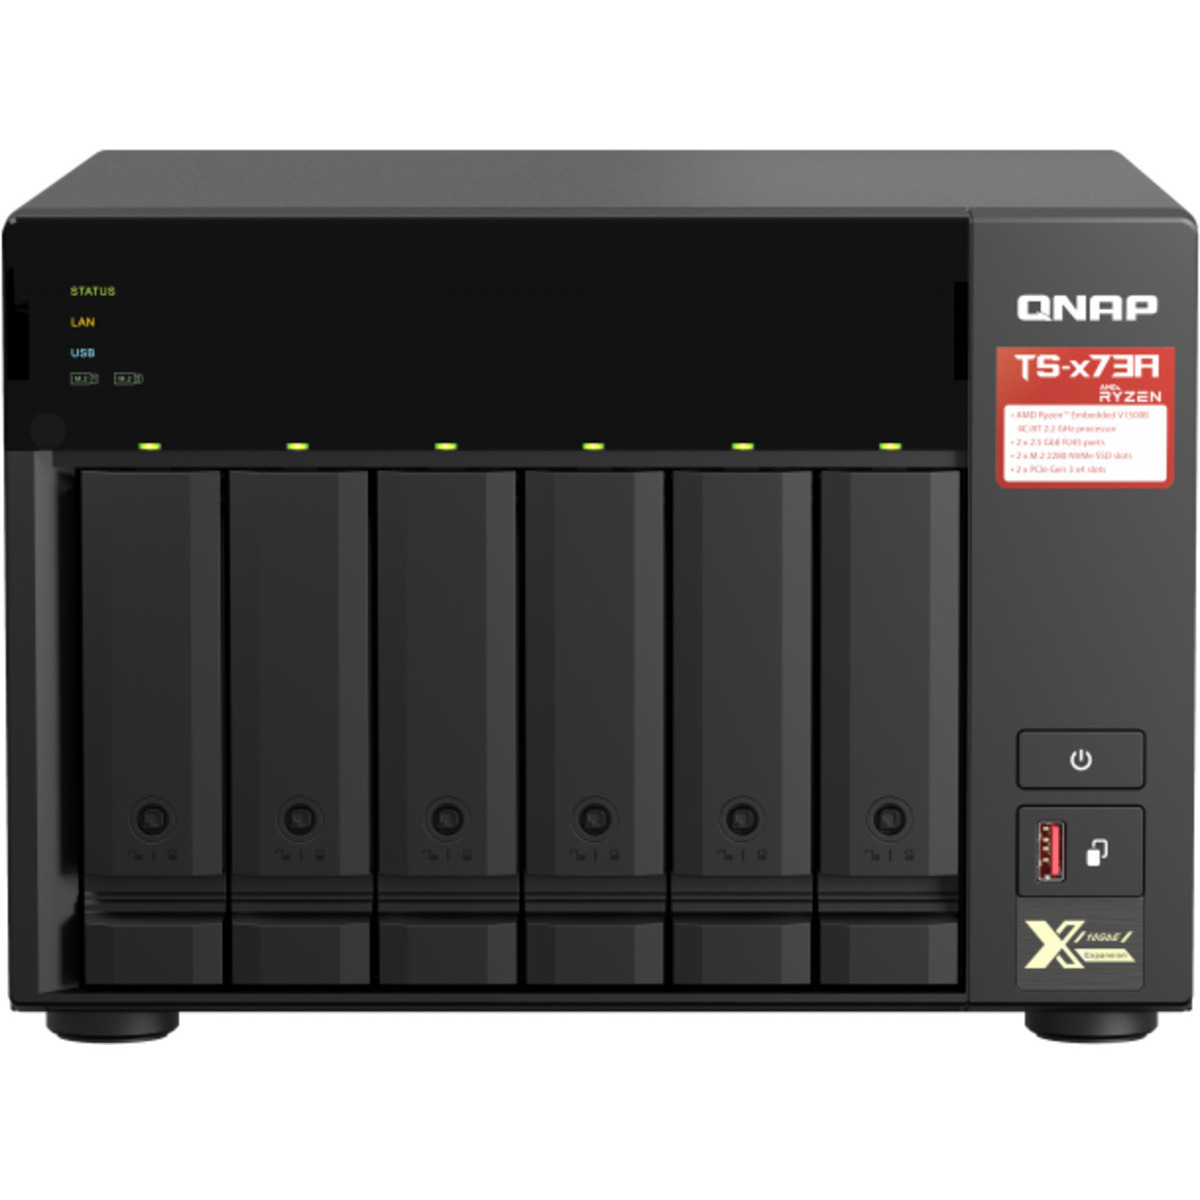 buy $2602 QNAP TS-673A 48tb Desktop NAS - Network Attached Storage Device 6x8000gb Western Digital Ultrastar DC HC320 HUS728T8TALE6L4 3.5 7200rpm SATA 6Gb/s HDD ENTERPRISE Class Drives Installed - Burn-In Tested - nas headquarters buy network attached storage server device das new raid-5 free shipping usa christmas new year holiday sale TS-673A